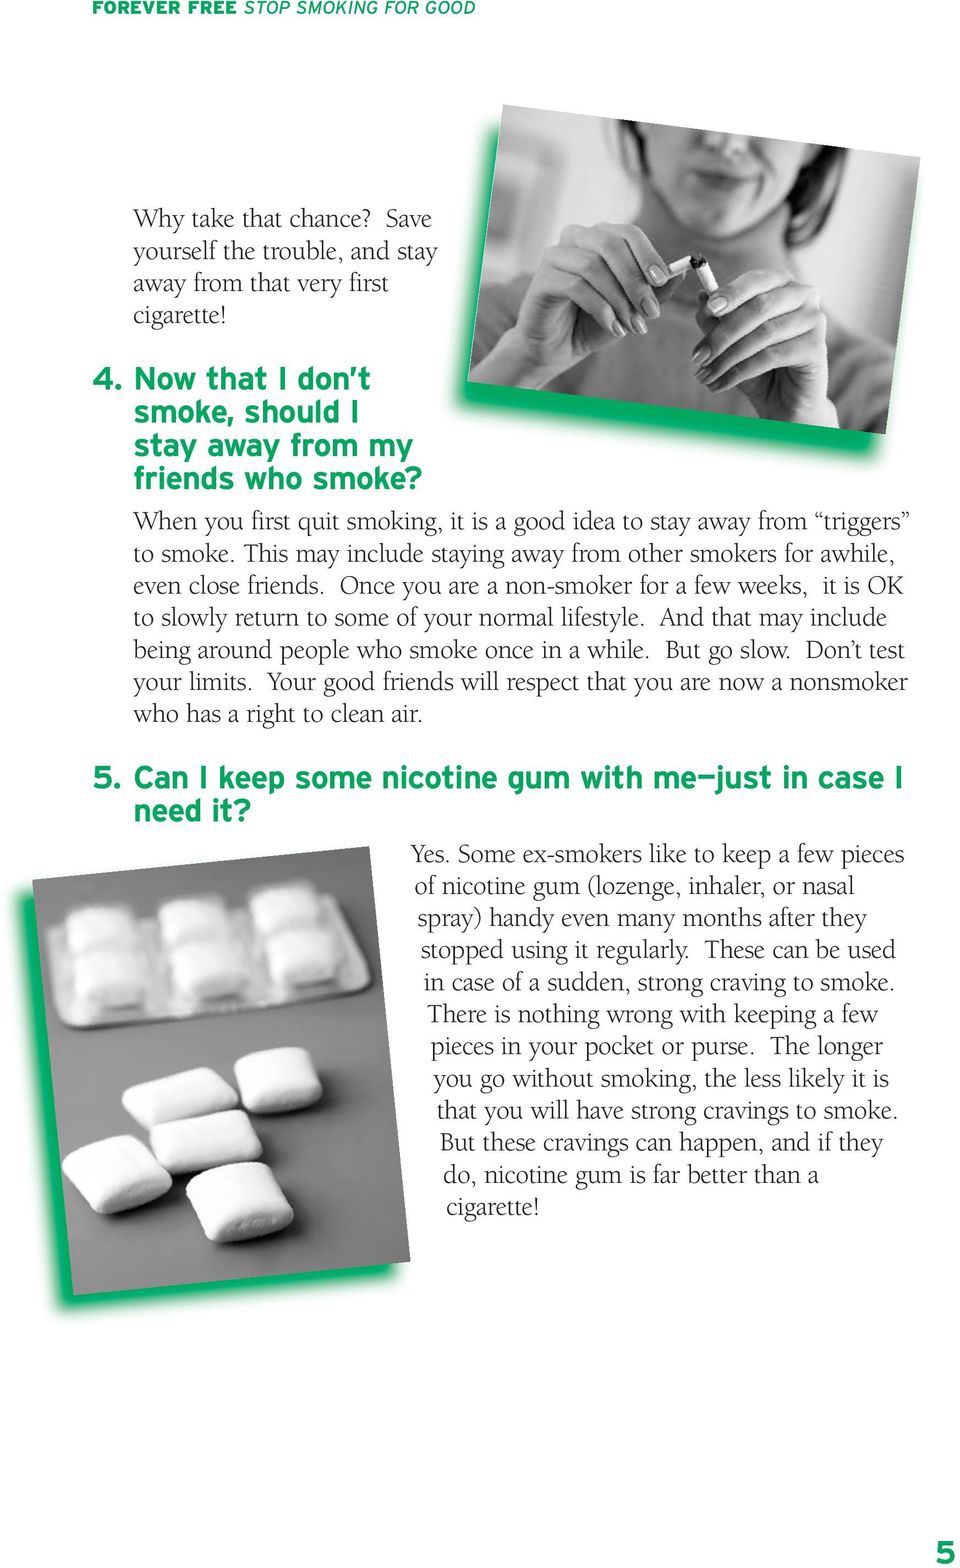 Once you are a non-smoker for a few weeks, it is OK to slowly return to some of your normal lifestyle. And that may include being around people who smoke once in a while. But go slow.